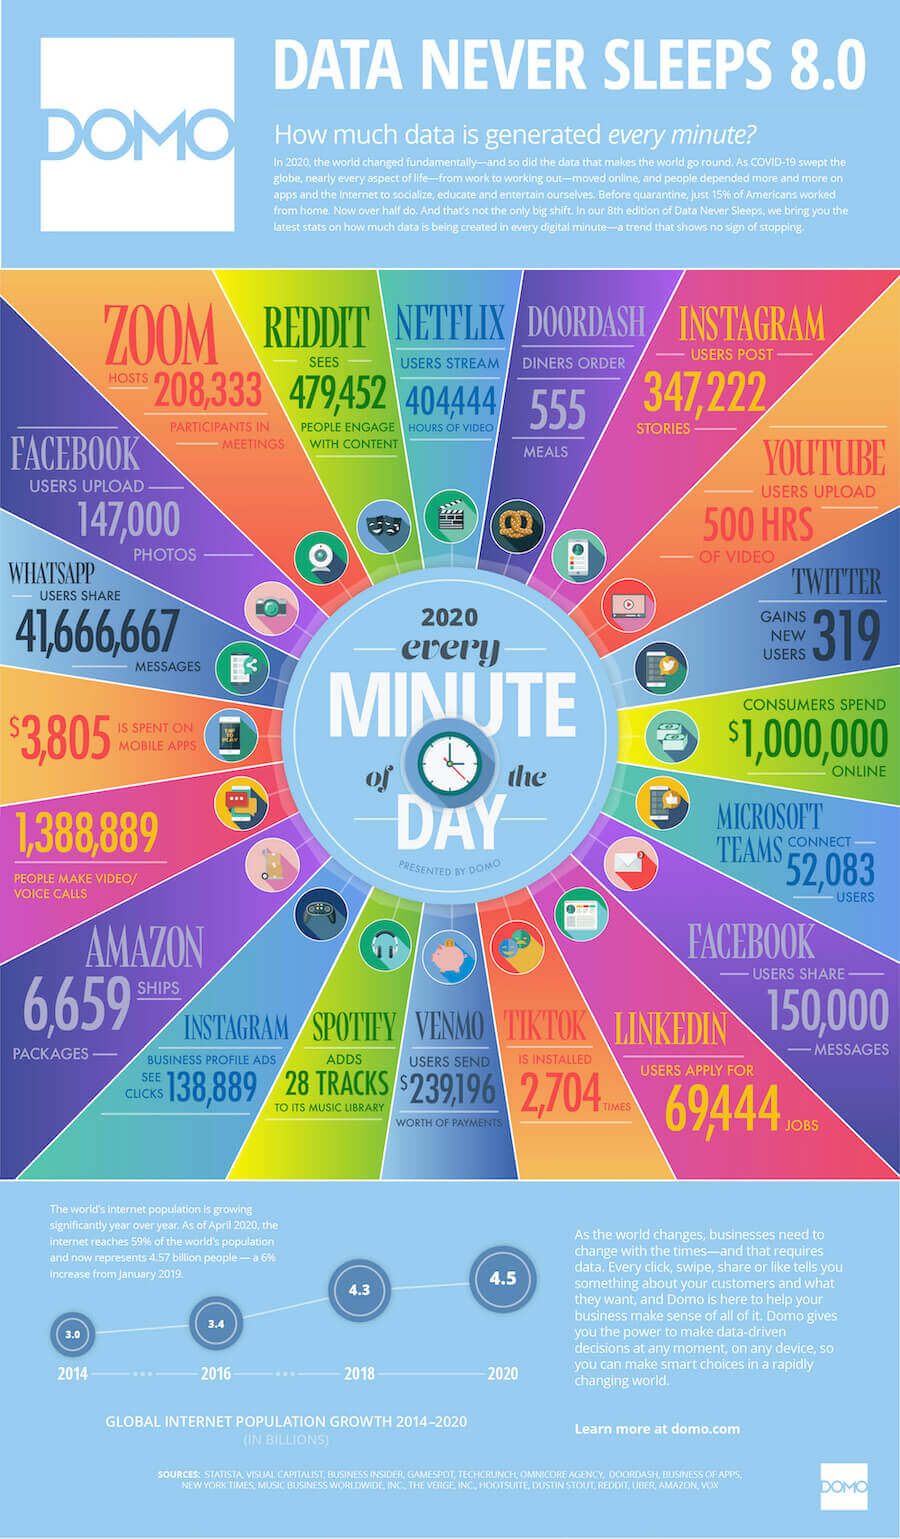 Data Never Sleeps 8.0 - how much data is generated every minute?